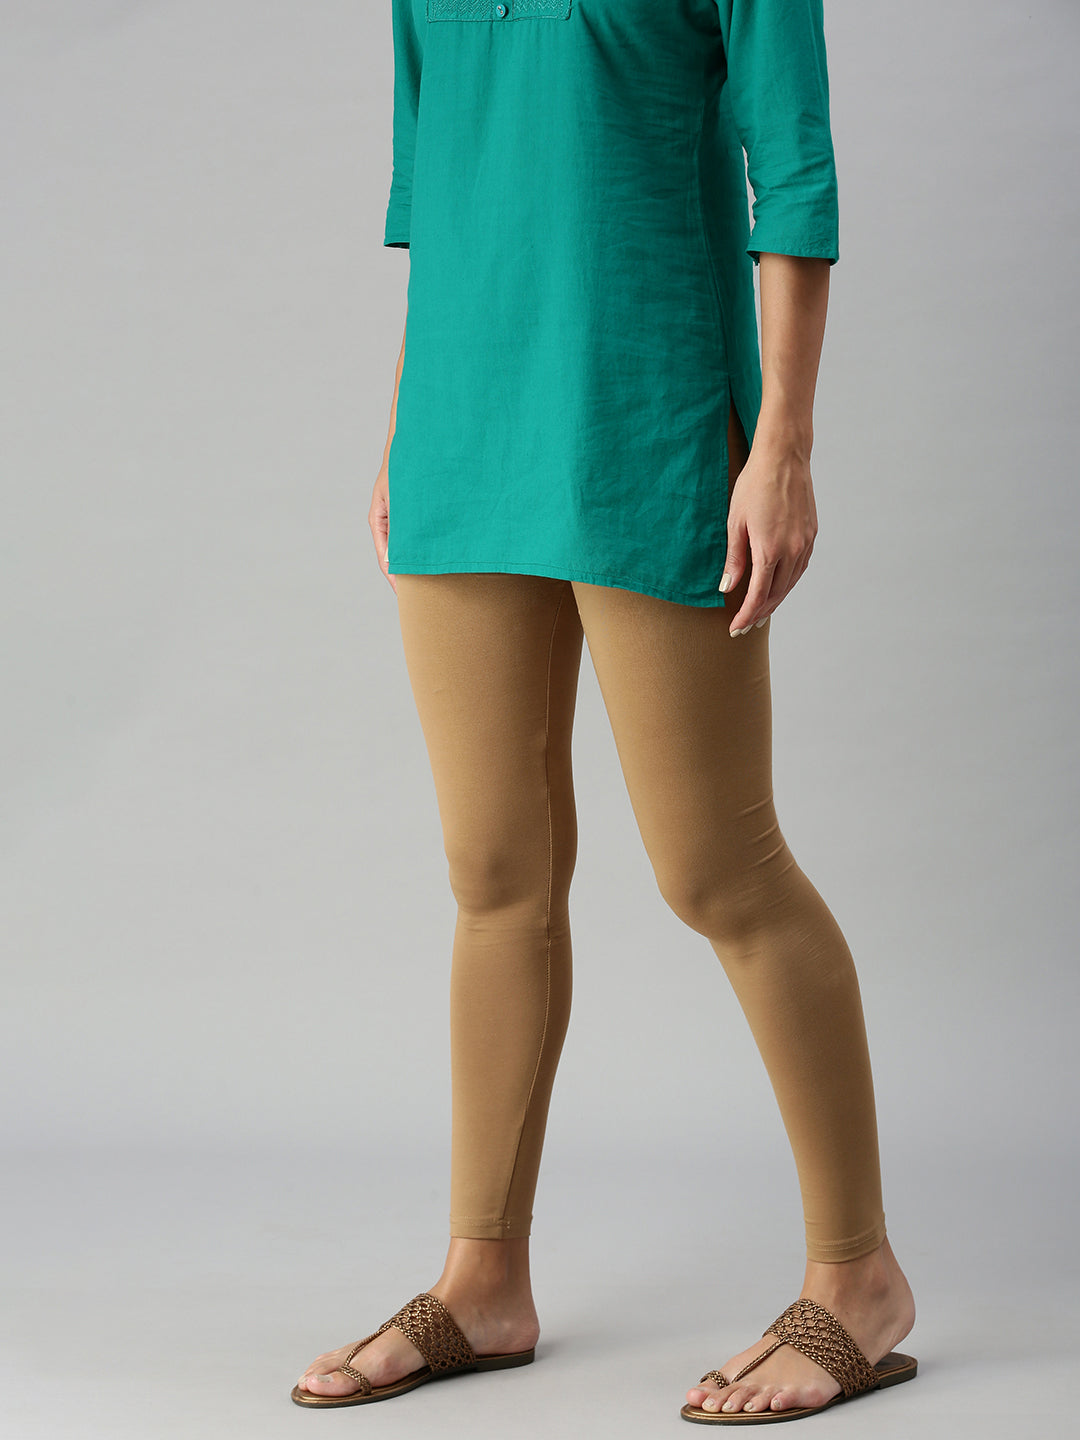 Anjali in Blue Tunic and Gold Leggings – South India Fashion